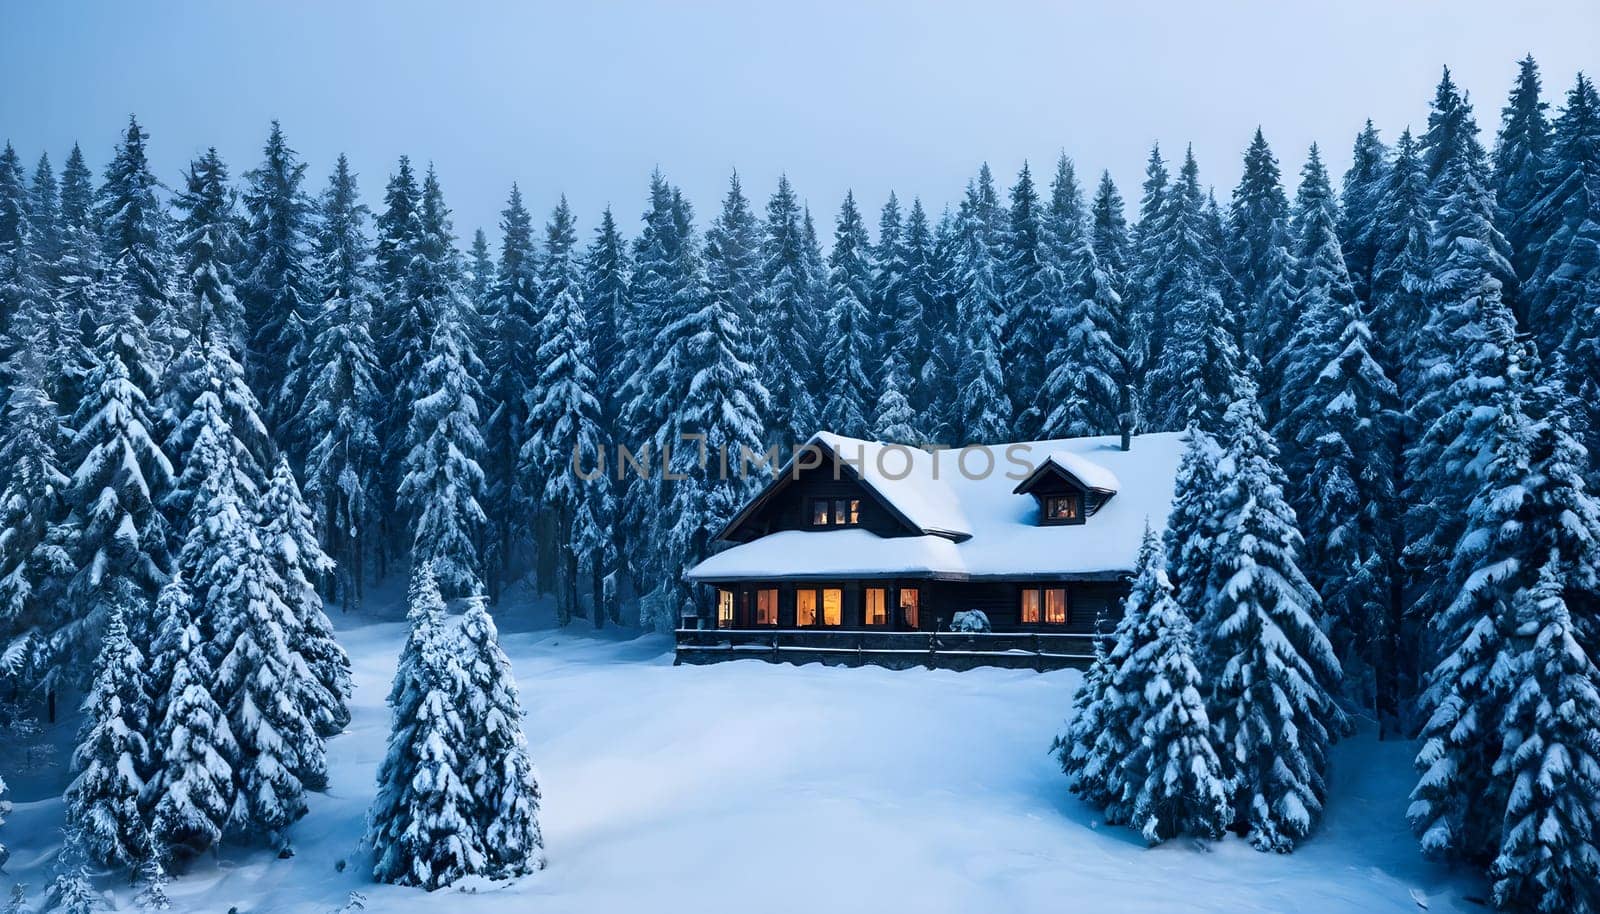 Winter Haven Cozy Retreats and Snowy Landscapes by Petrichor